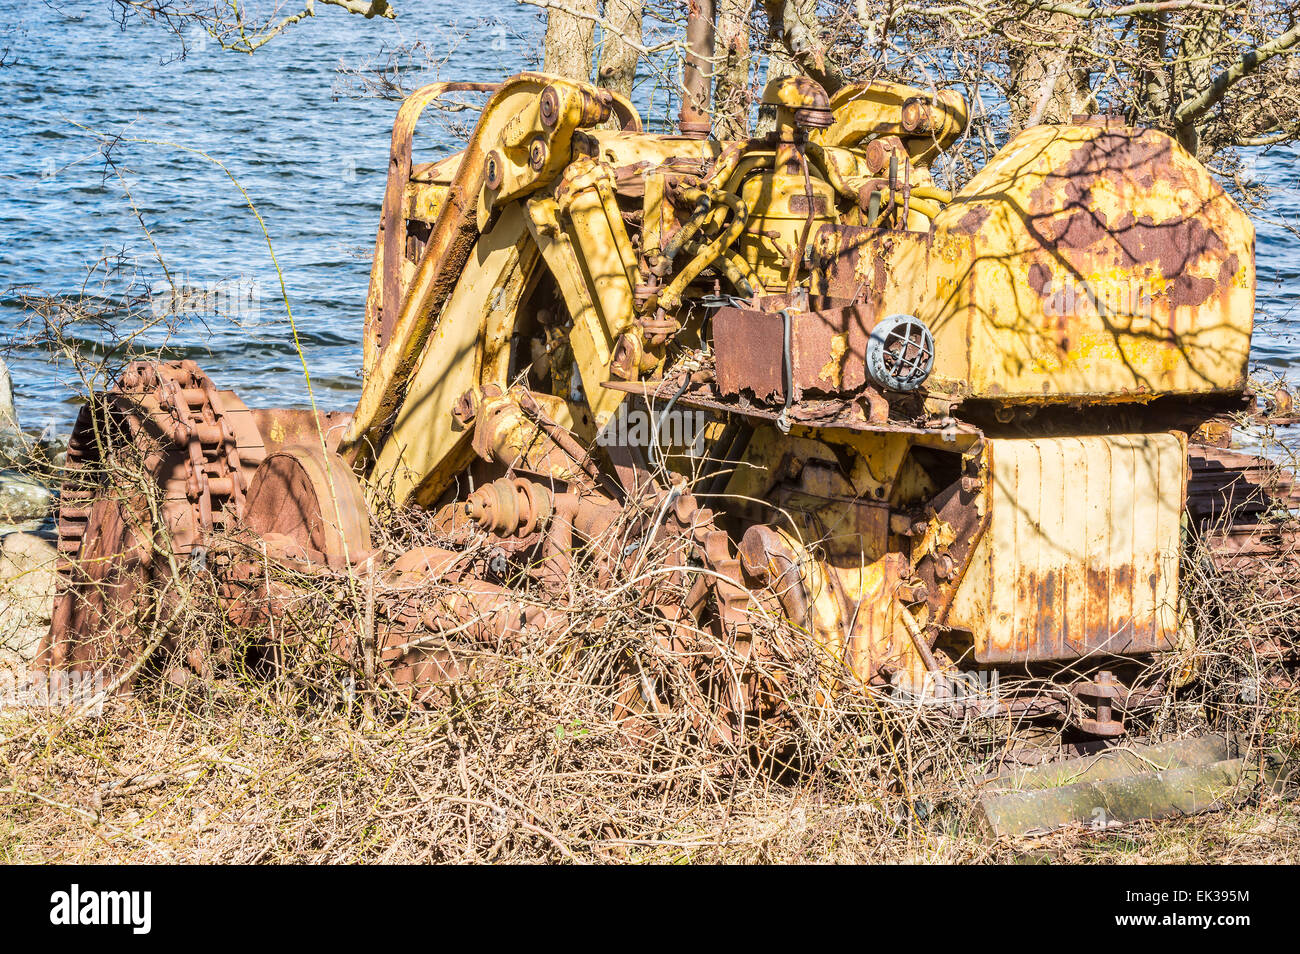 Abandoned and weathered yellow bulldozer crawler. Nature is trying cover it with vegetation. Sea in Lots of rust Stock Photo - Alamy